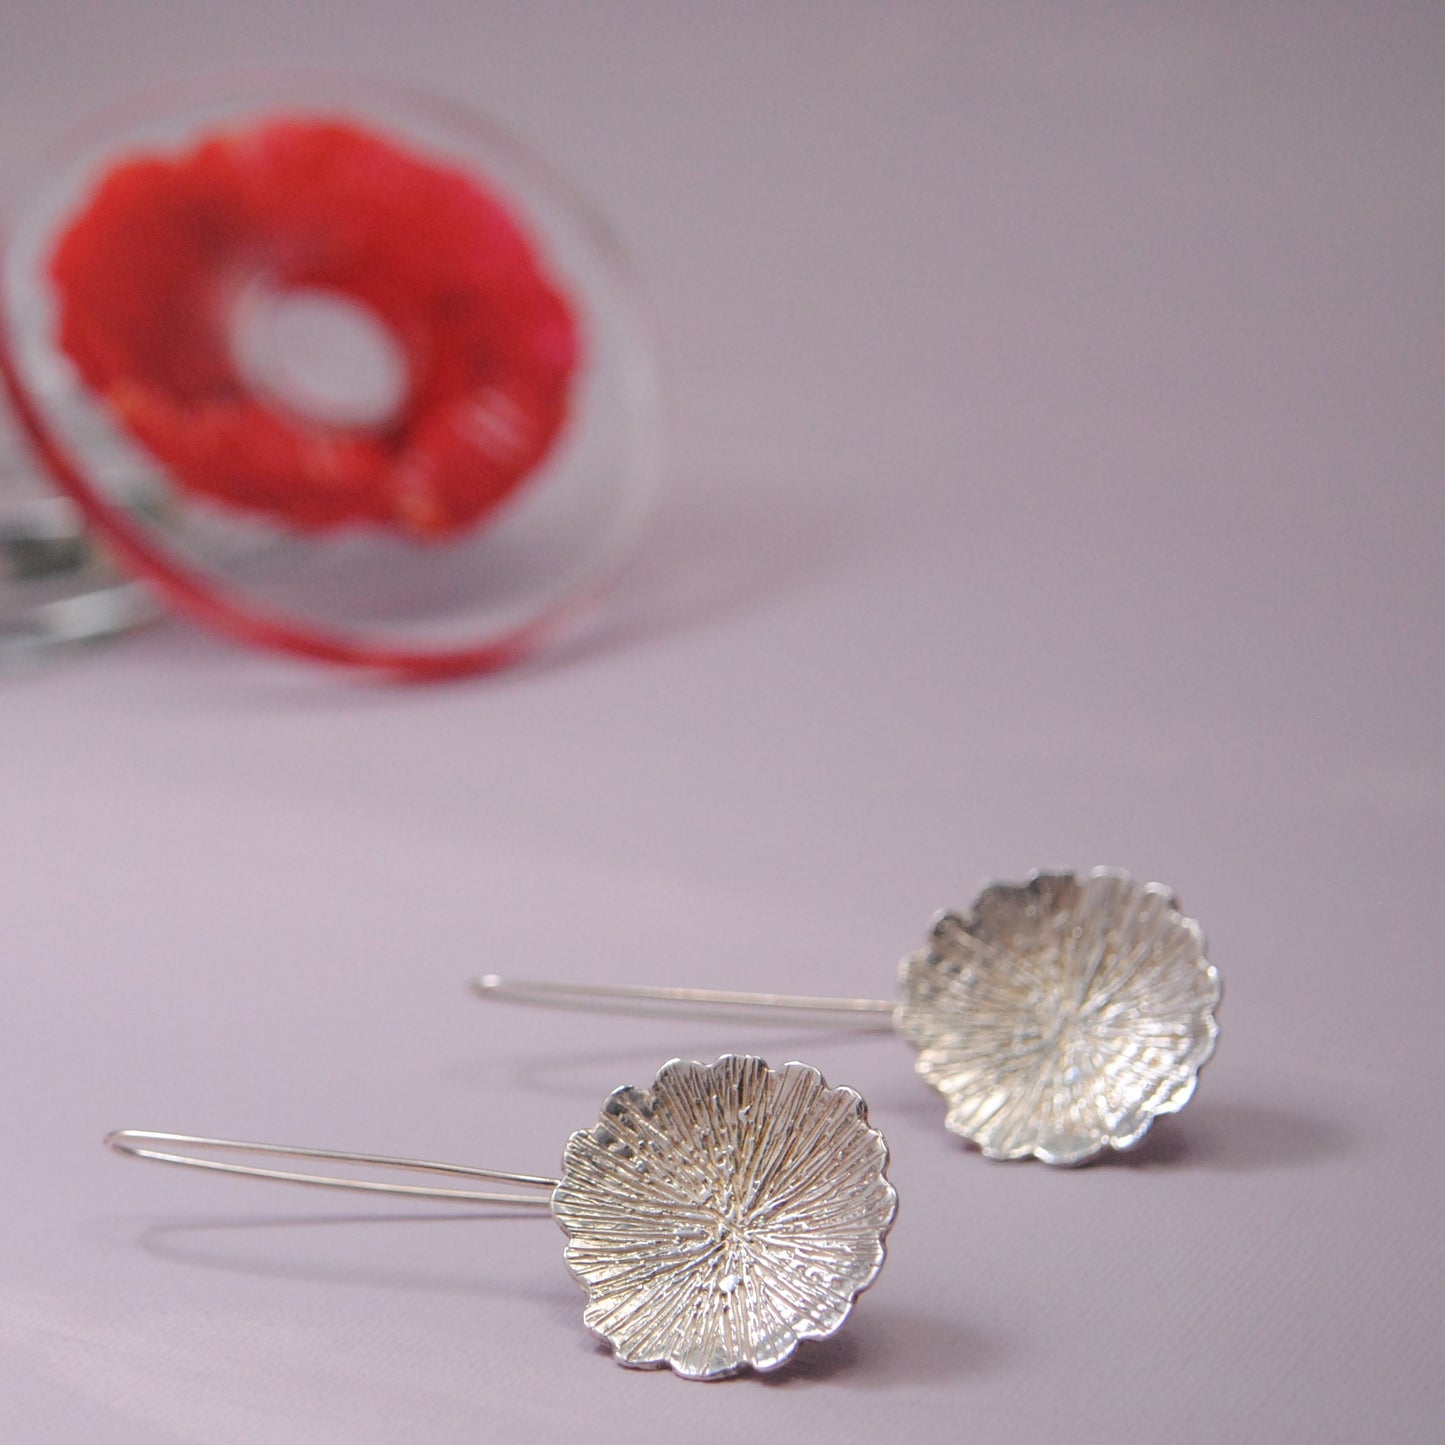 Long sterling silver earrings with a design of a flower . Flowers hang from a long silver wire.